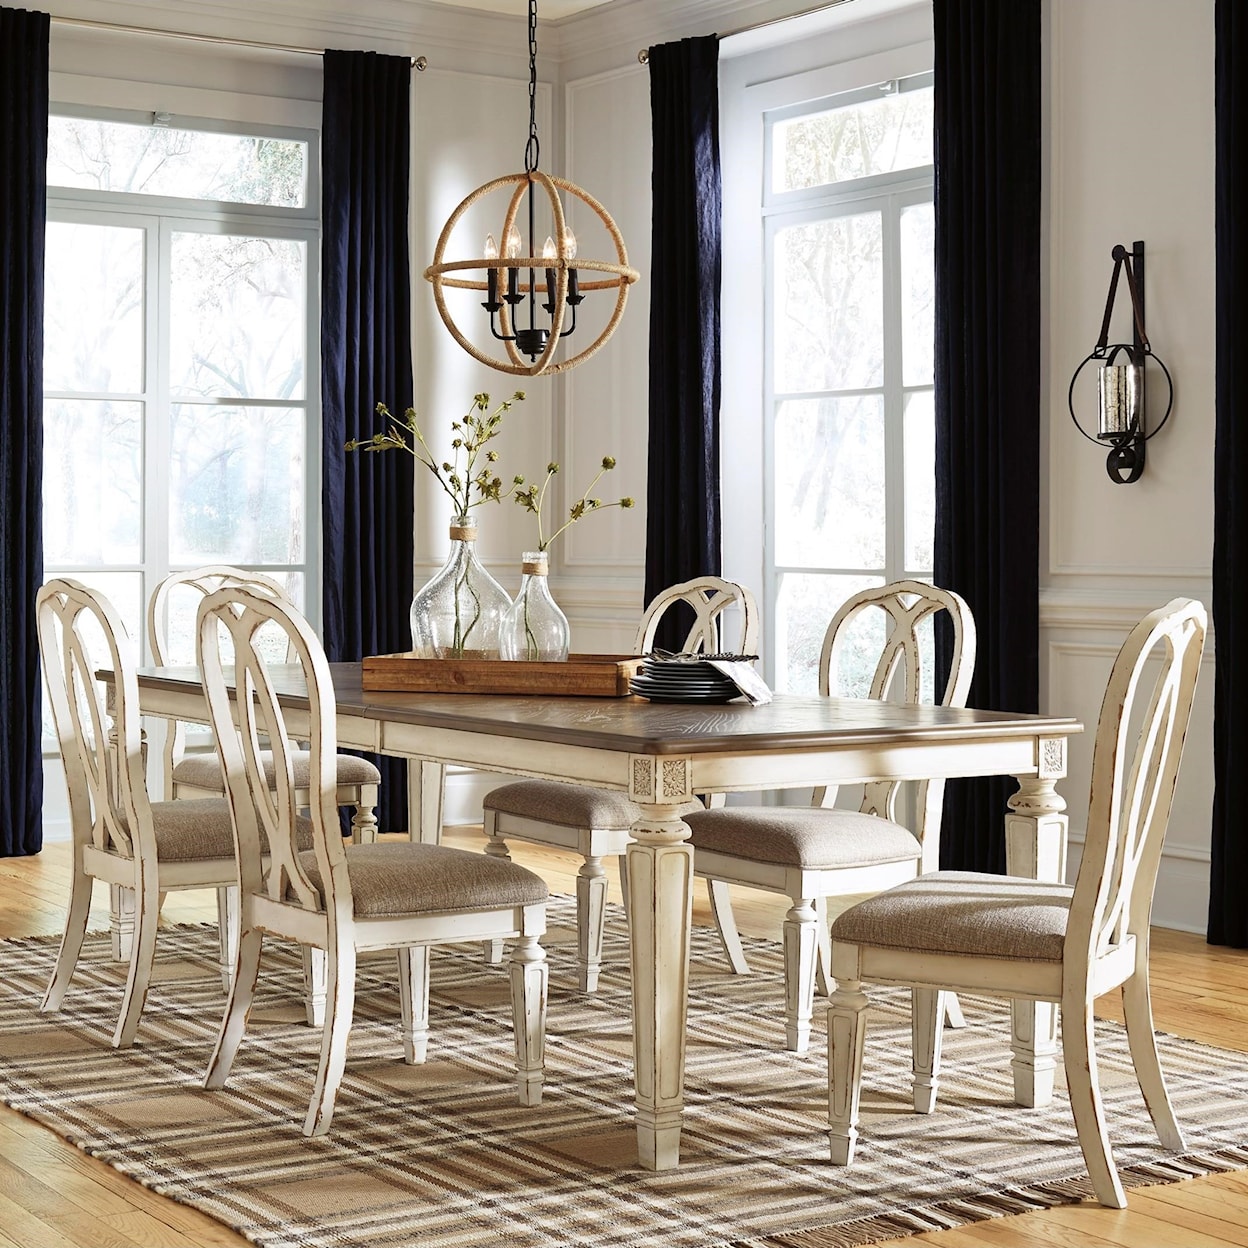 Benchcraft Realyn 7-Piece Rectangular Table and Chair Set